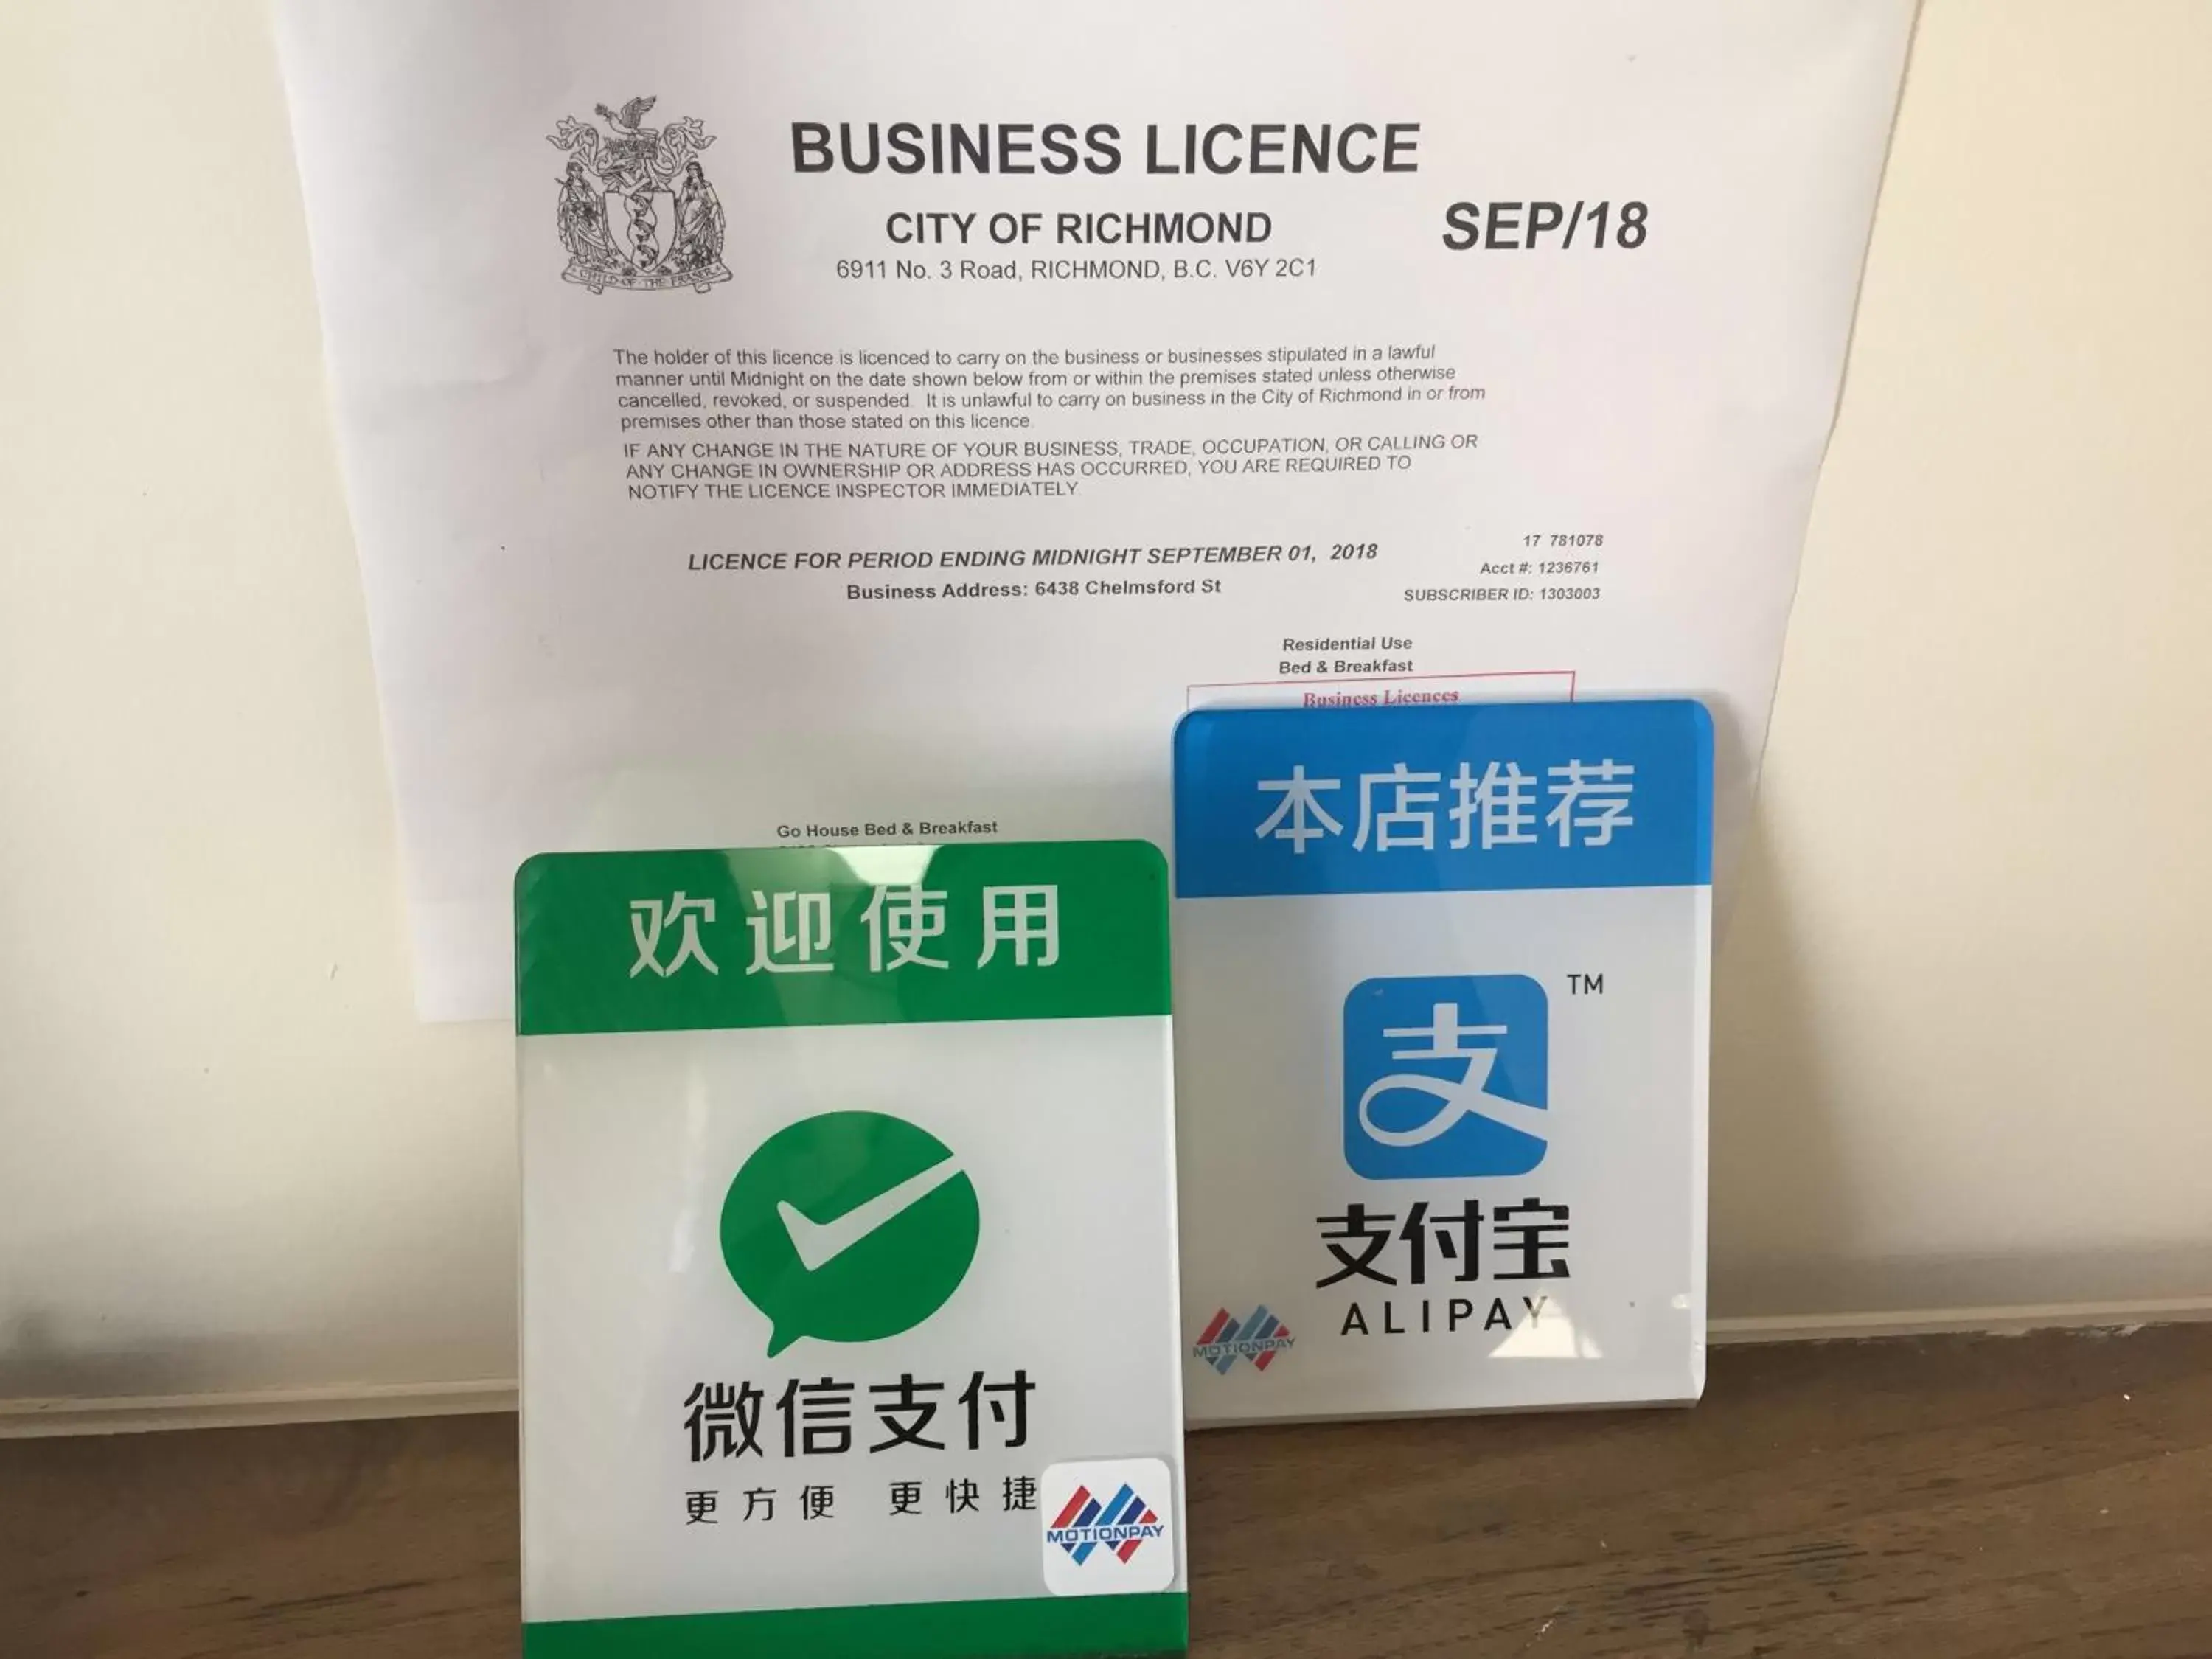 Logo/Certificate/Sign in Go House